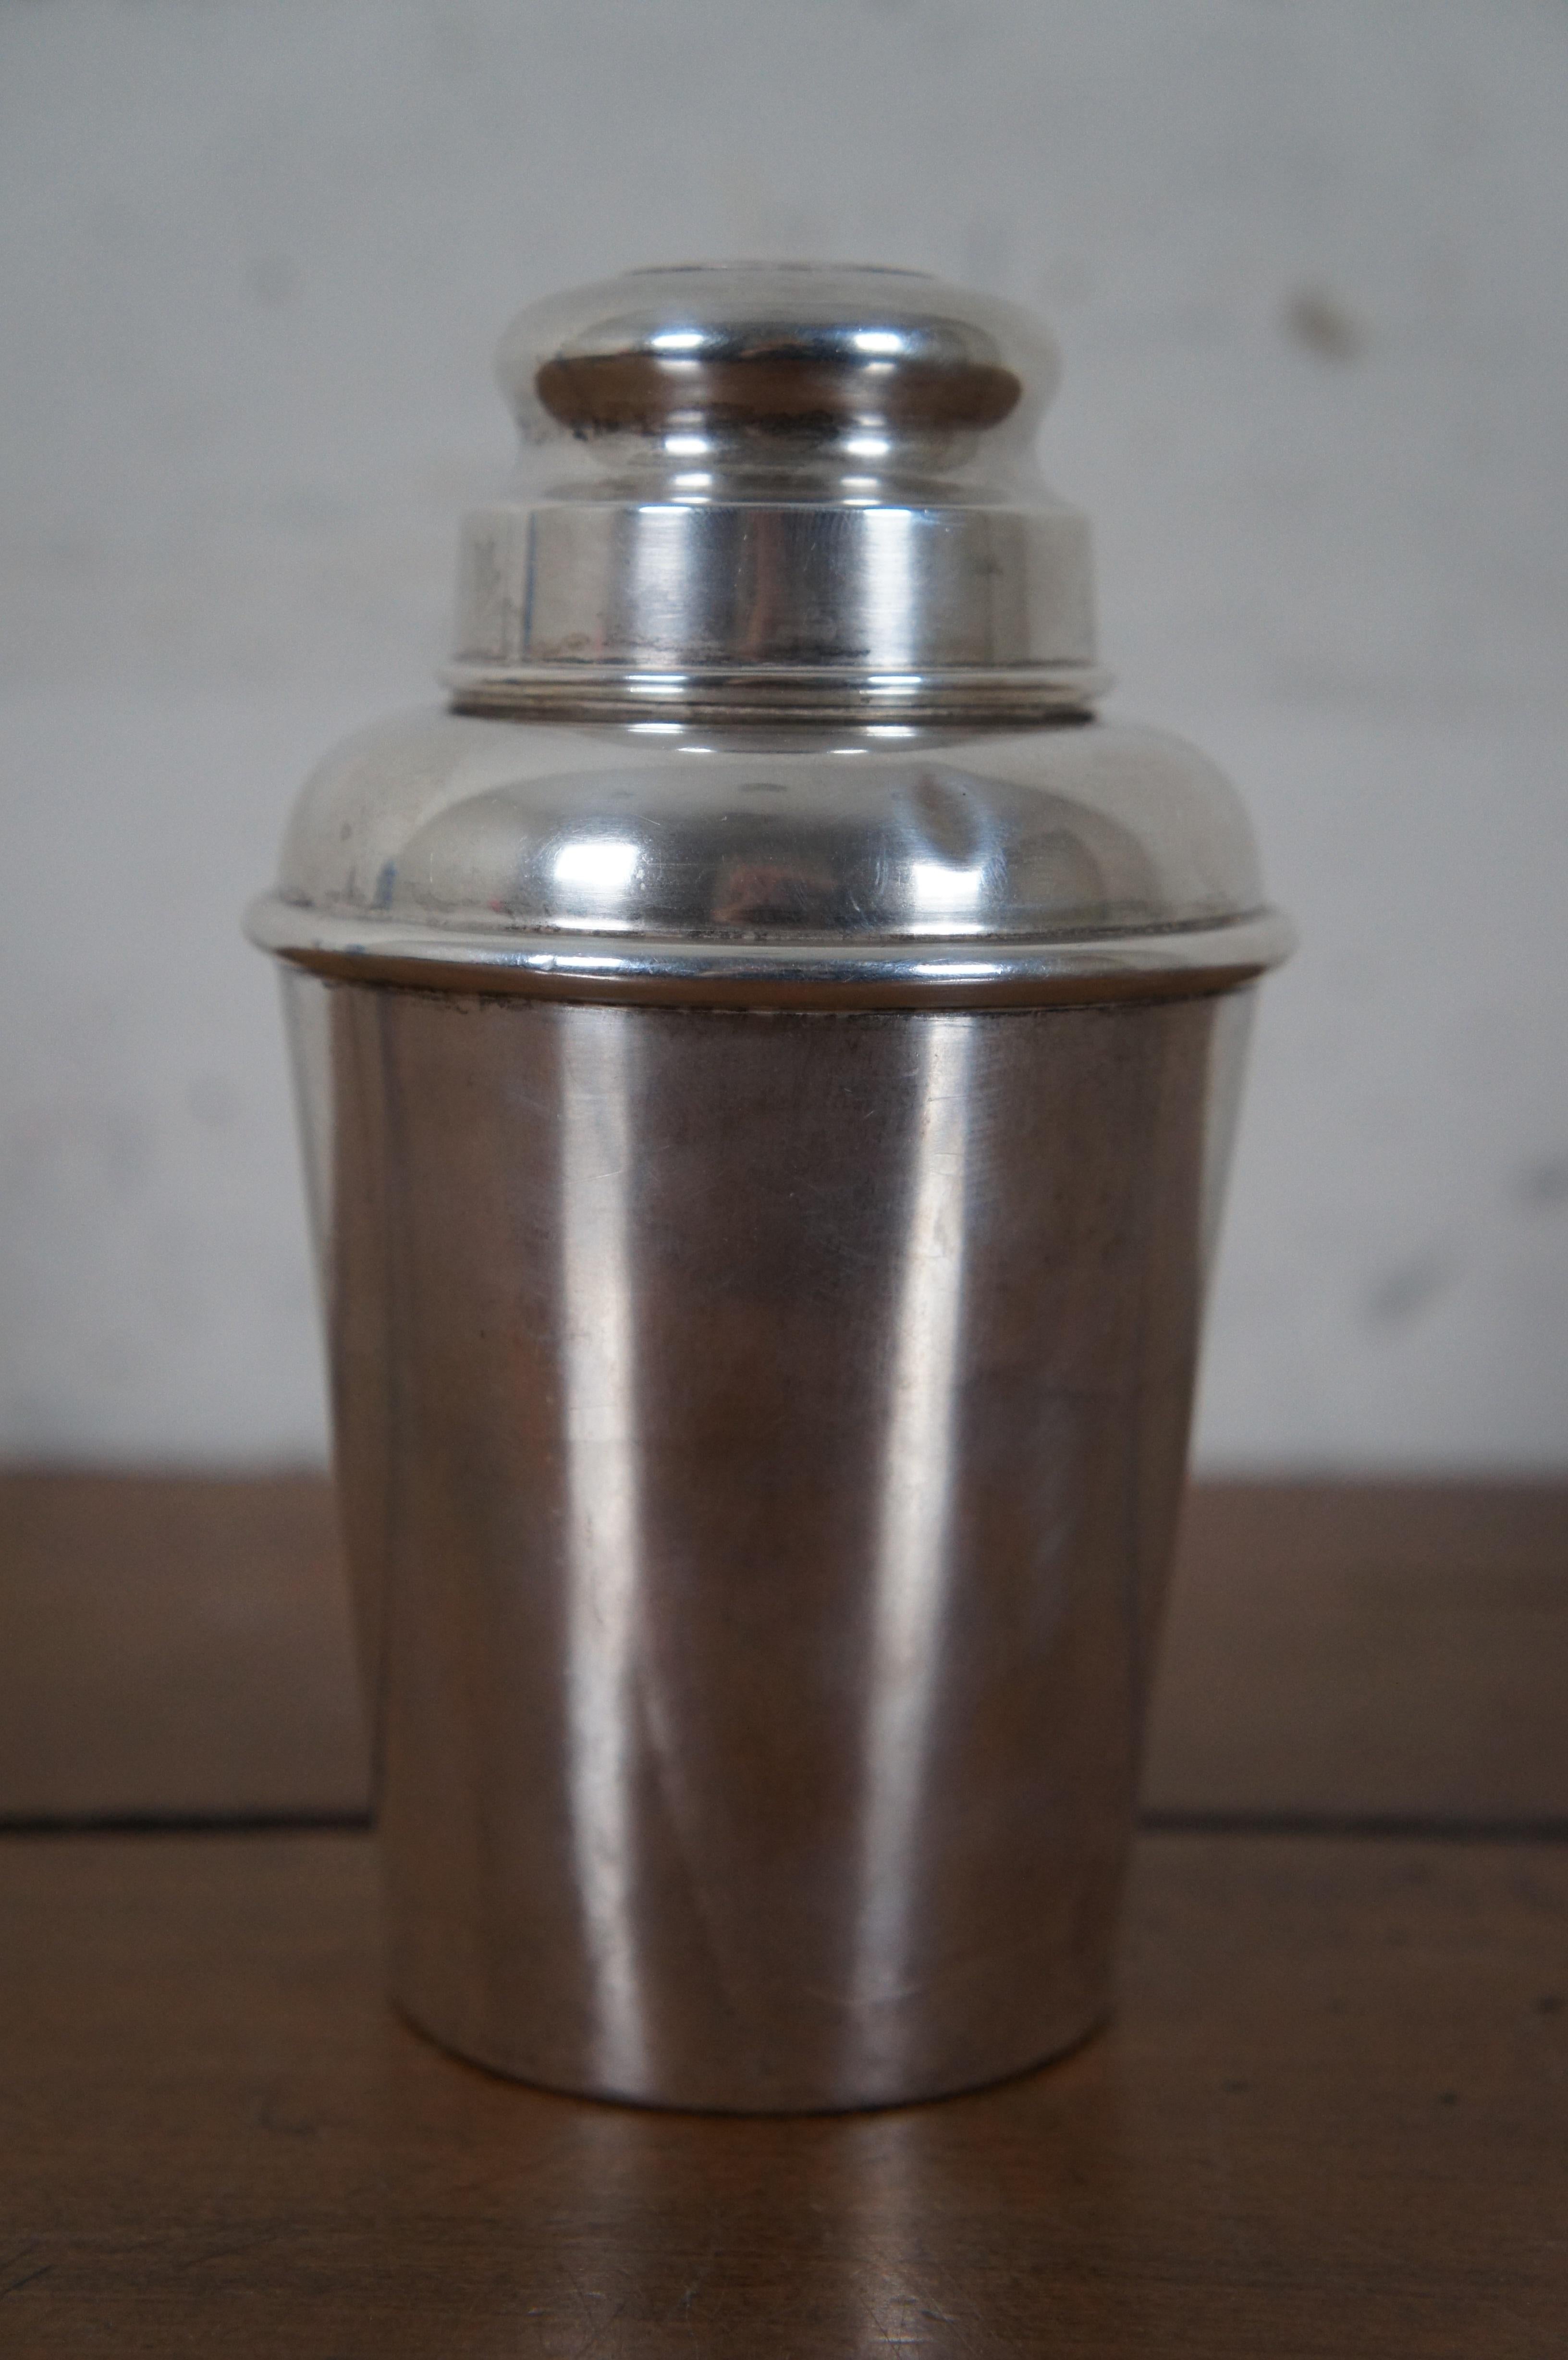 Argent sterling 1939 Reed & Barton Shreve Crump Low Sterling Silver Cocktail Shaker 151g 5.5